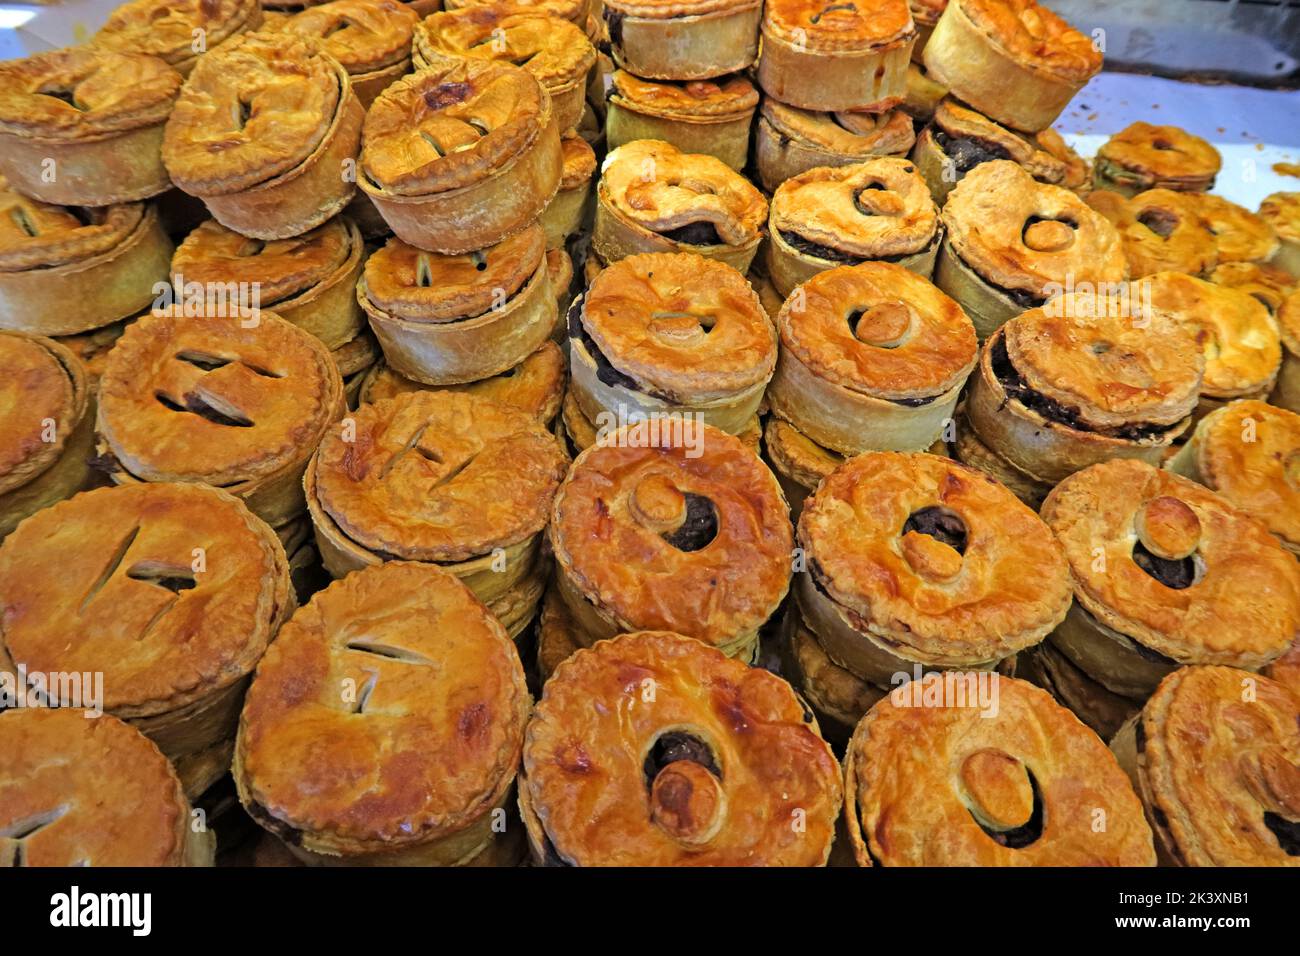 Pies at a bakers shop, piled up for retail purchase, Callandar, Scotland, UK, FK17 8AA Stock Photo